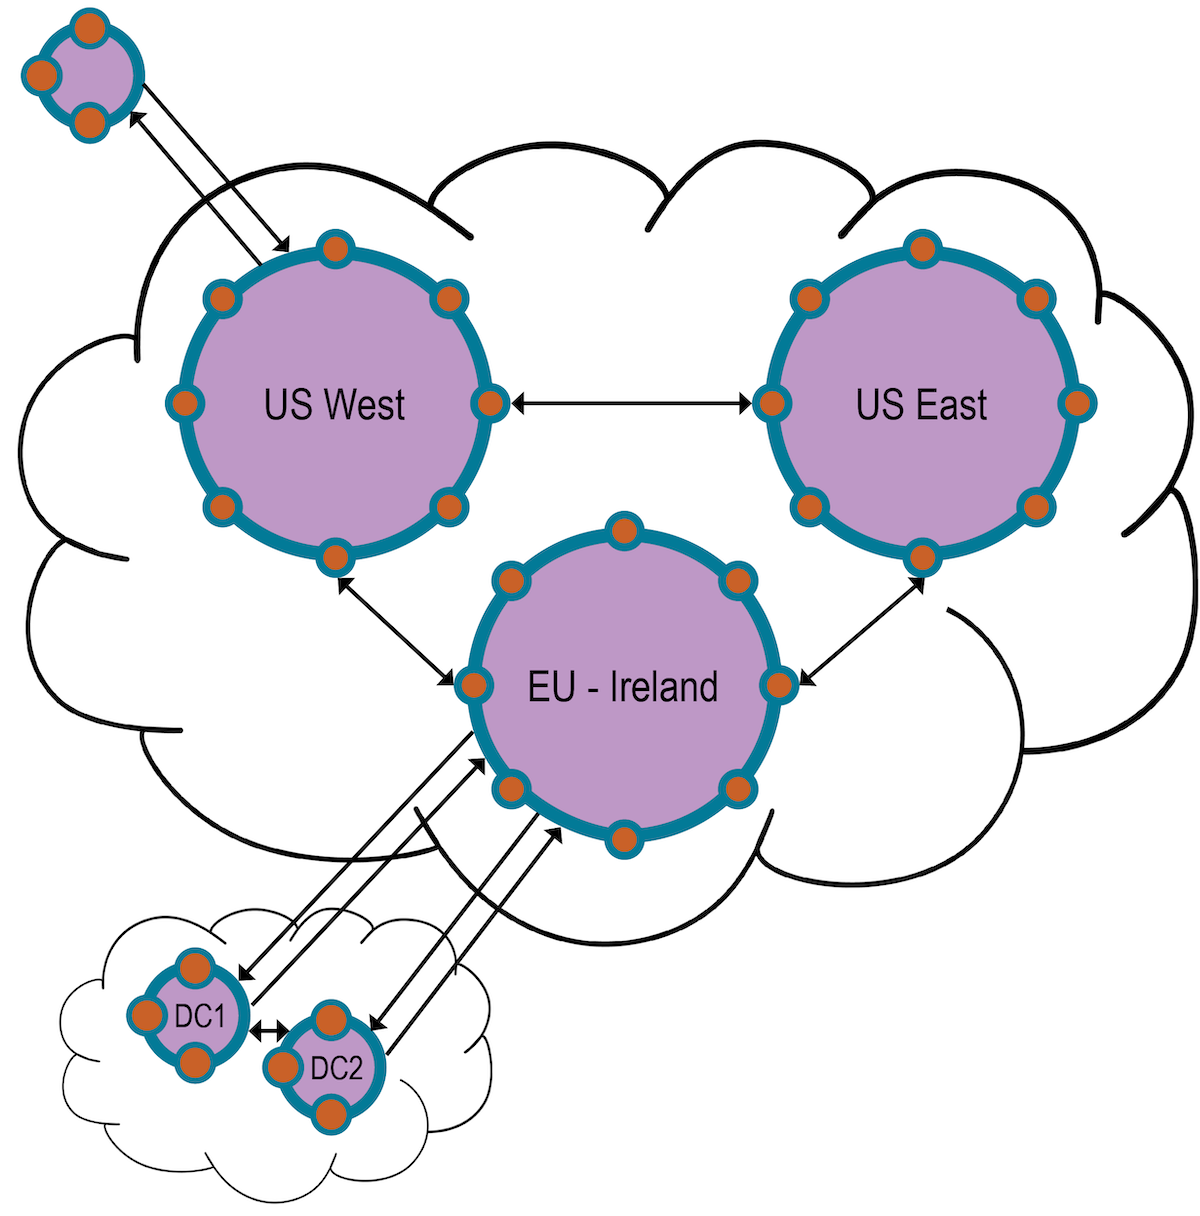 Image showing remote sensors both transmitting and receiving data to/from a centralized hub cluster